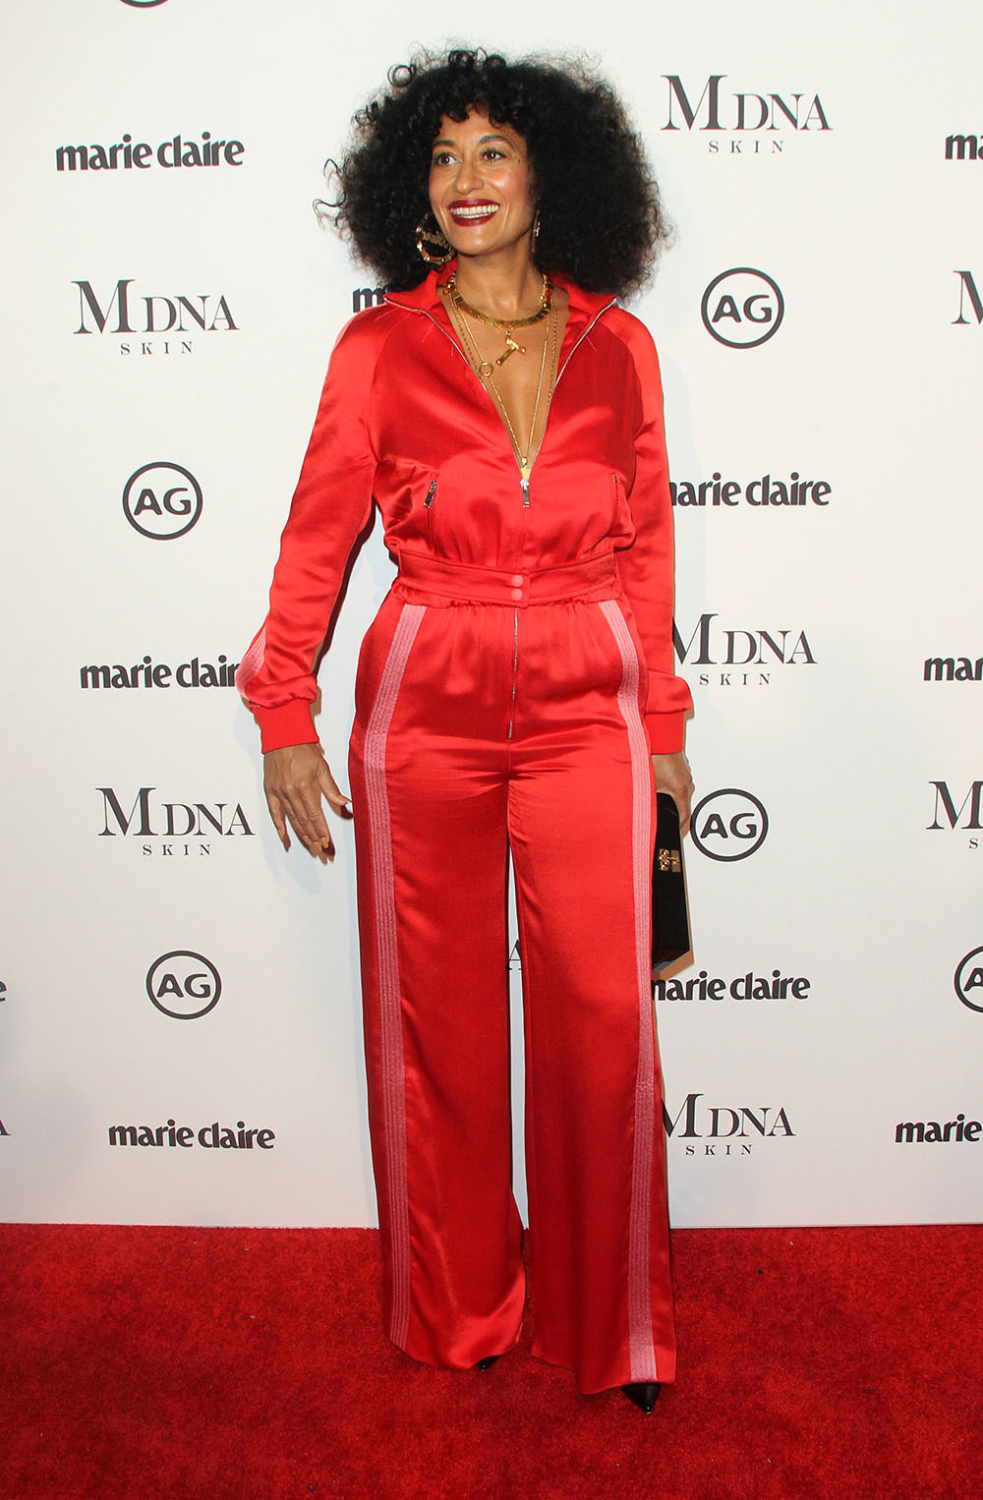 Tracee Ellis Ross at Marie Clair’s Image Makers Award 2018